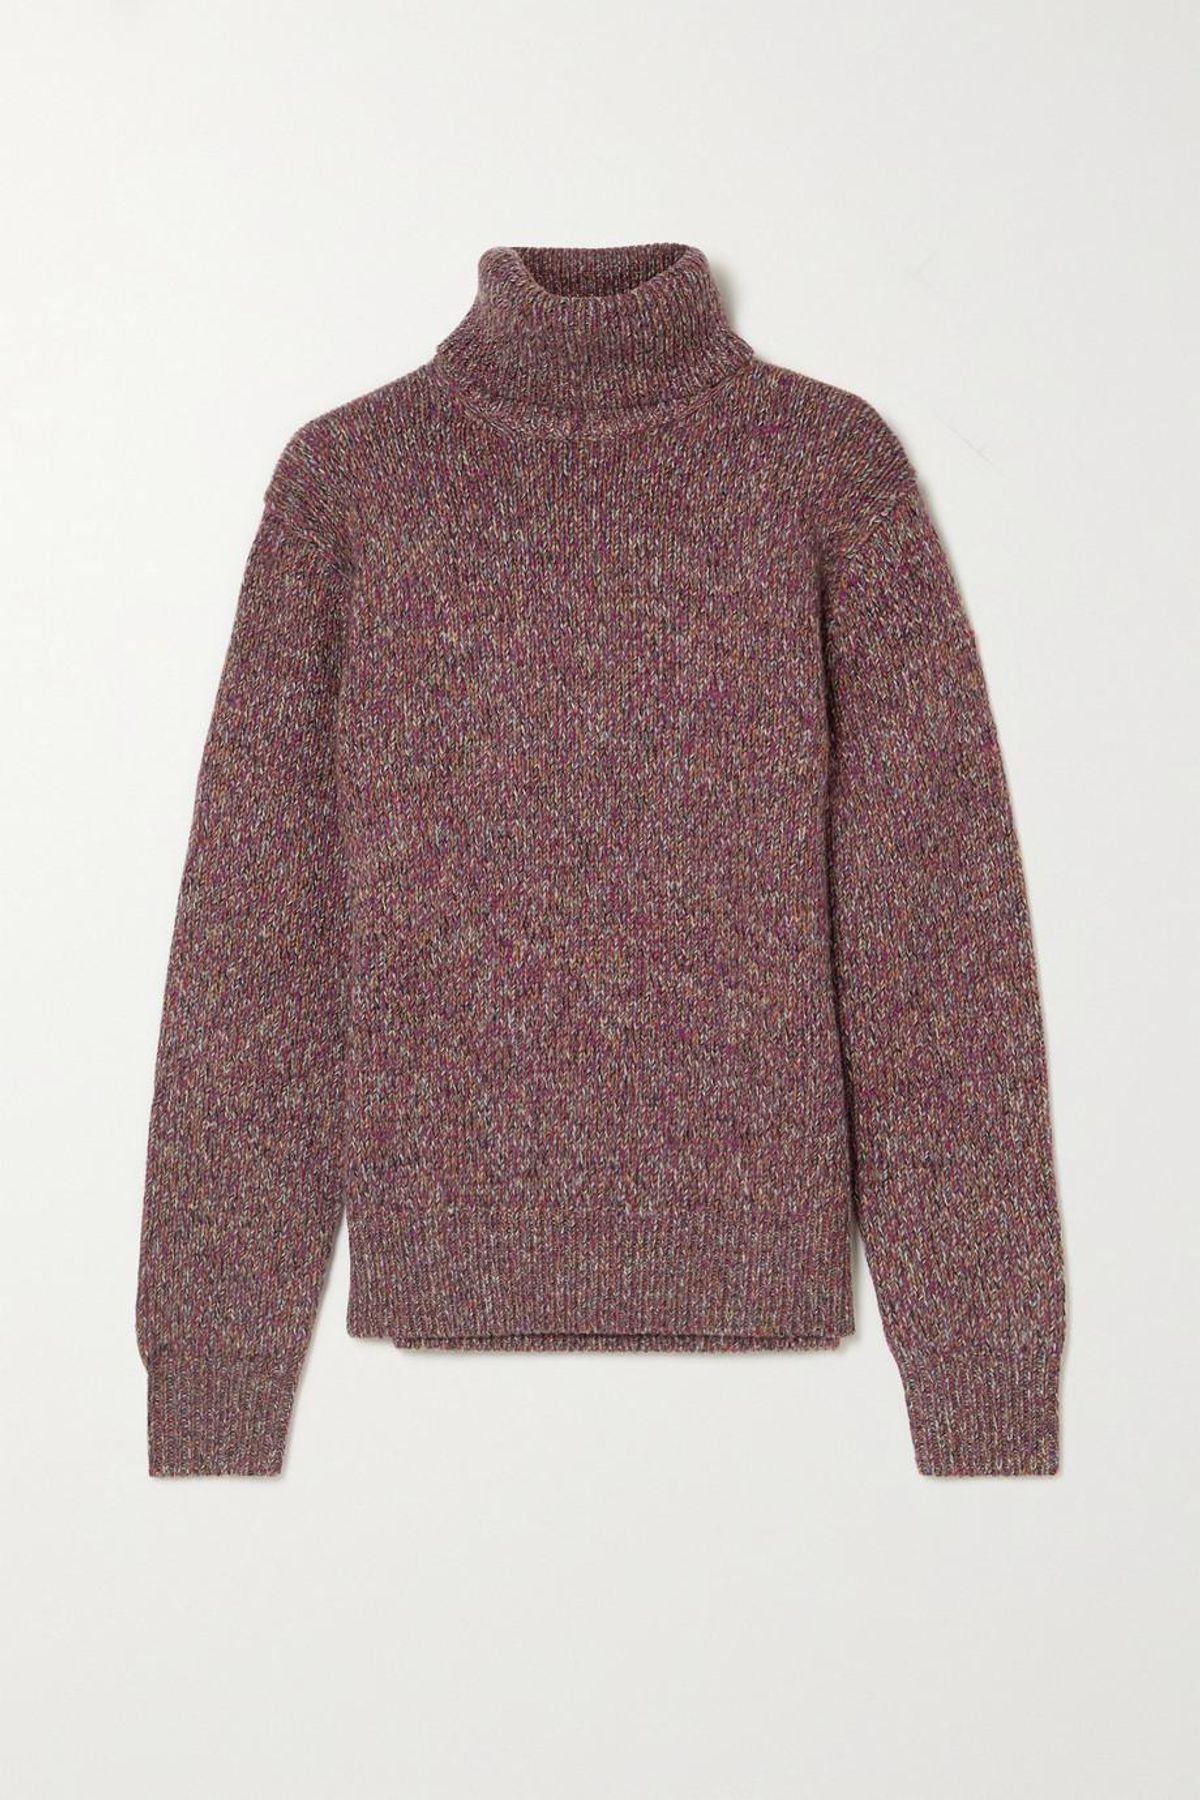 chloe cashmere and wool blend turtleneck sweater